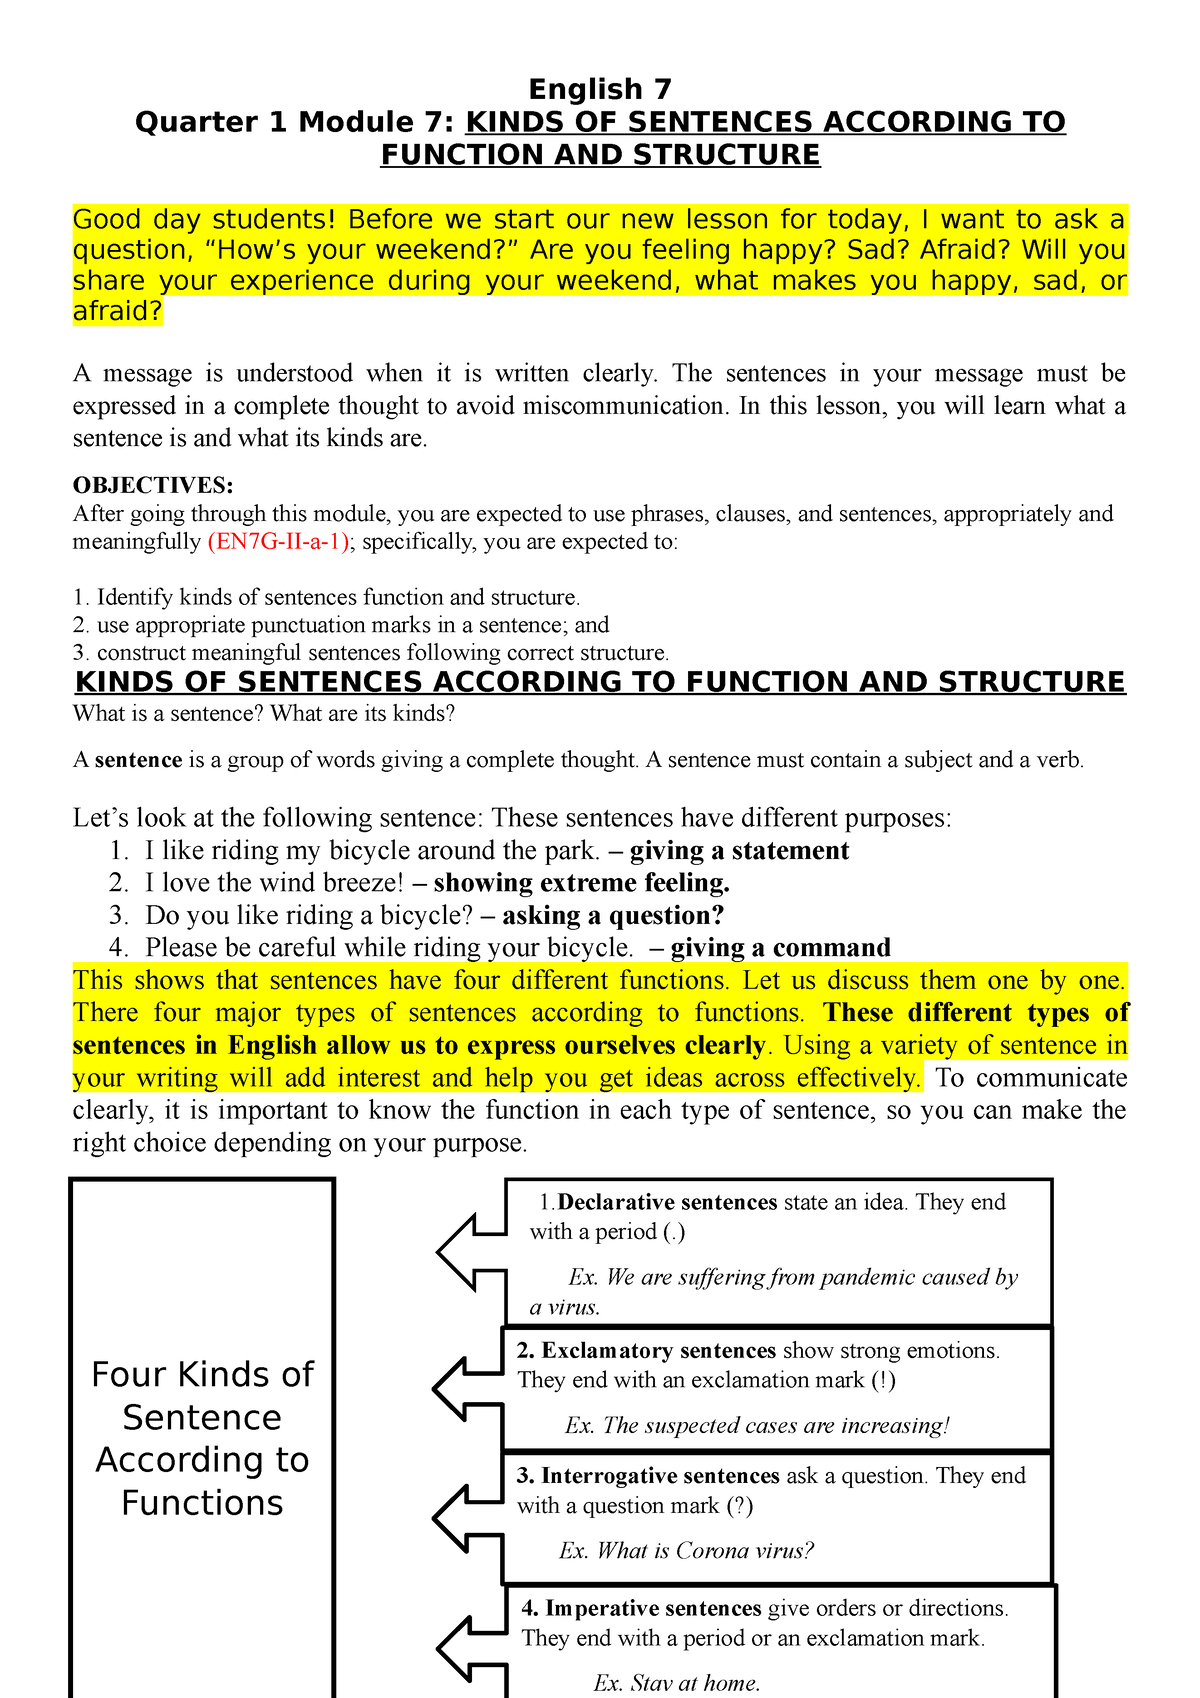 Quarter 1 Module 7 Kinds Of Sentences According To Function And Structure English 7 Quarter 1 6590